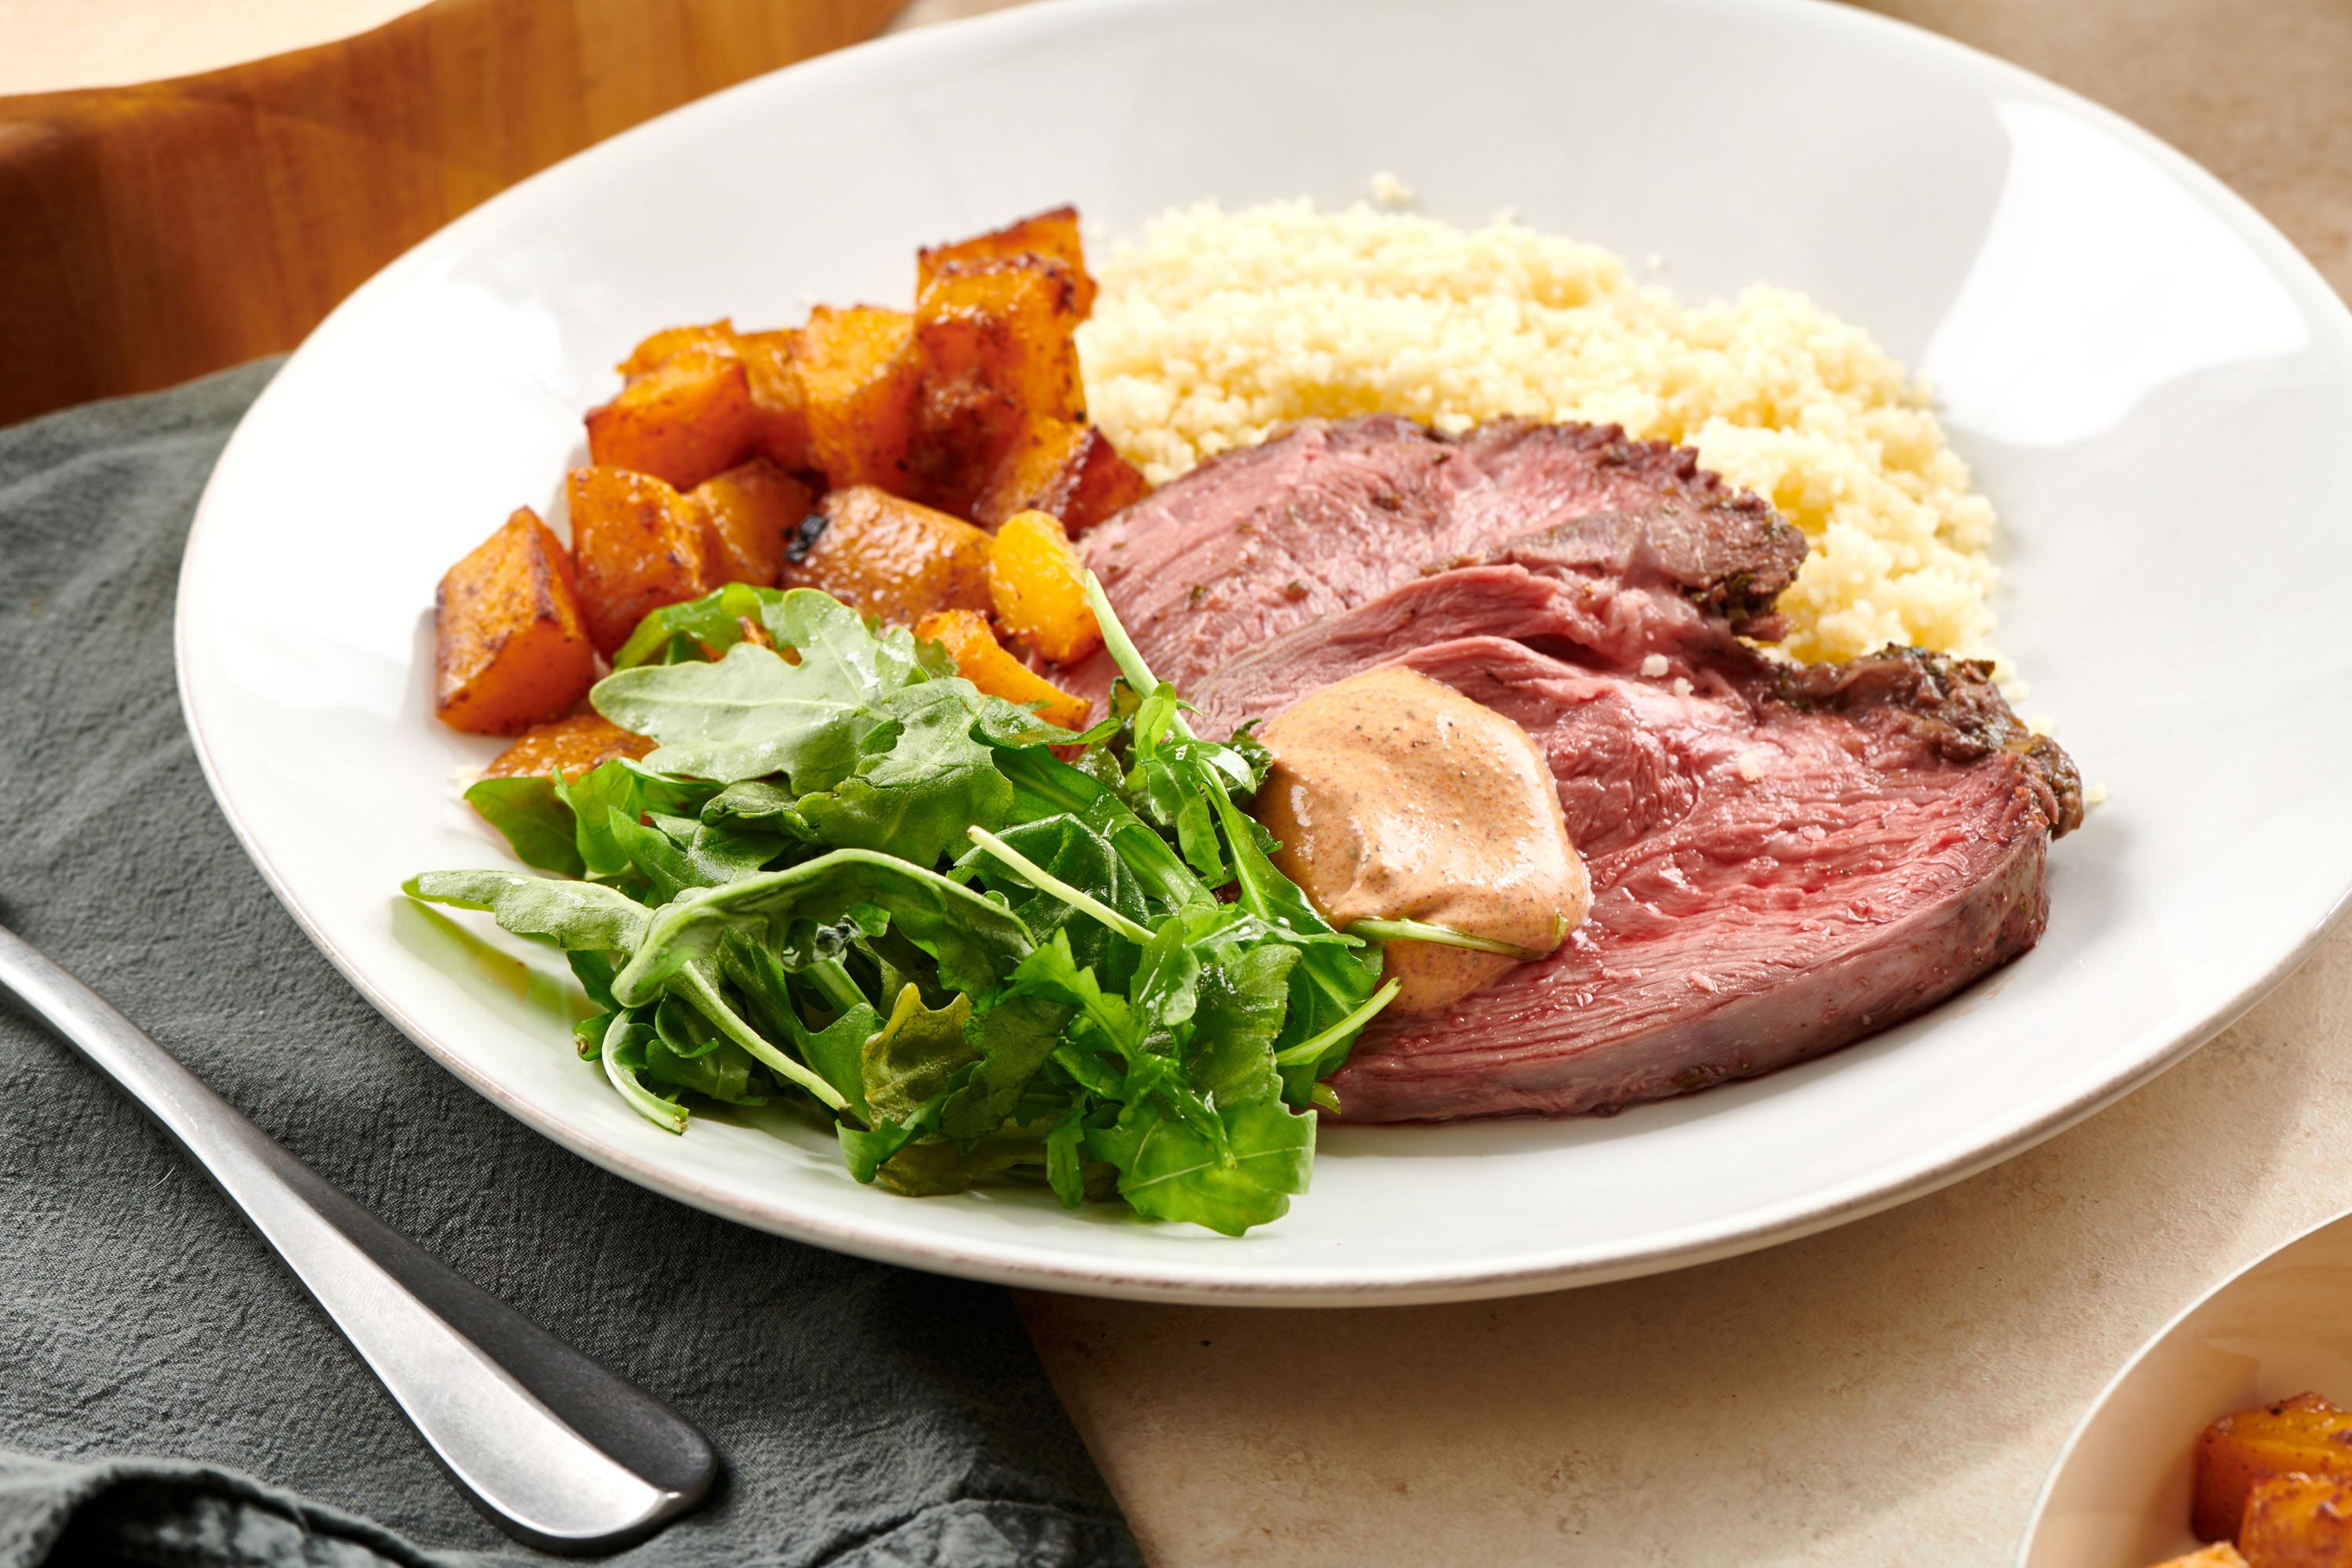 Couscous, arugula, squash, and Moroccan Leg of Lamb with harissa sauce on a plate.